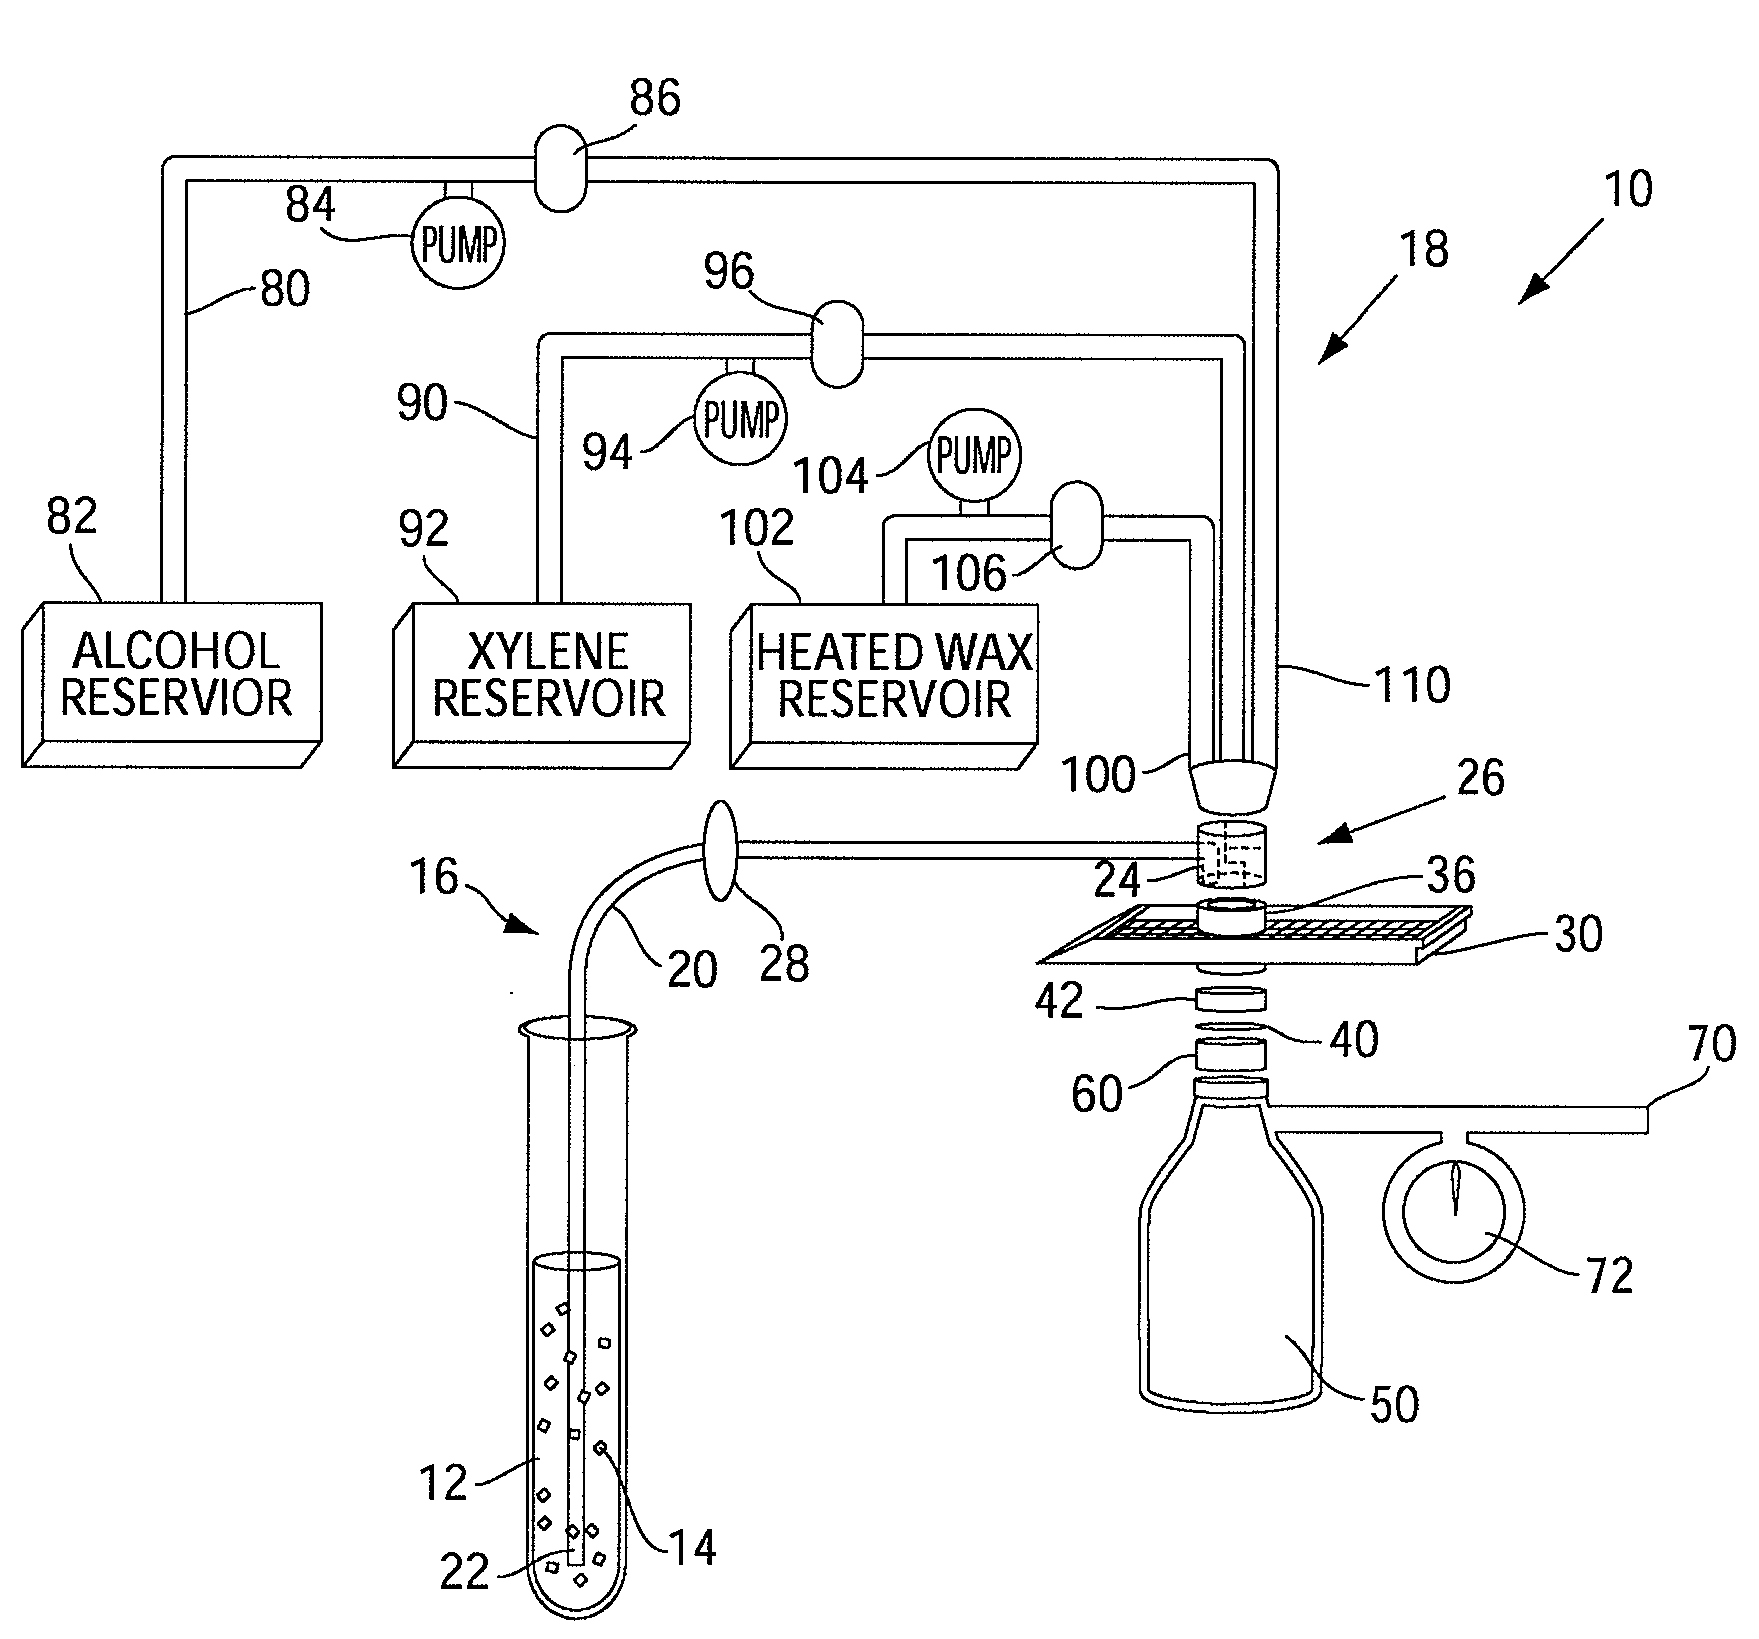 Method and apparatus for preparing cells for microtome sectioning and archiving nucleic acids and proteins